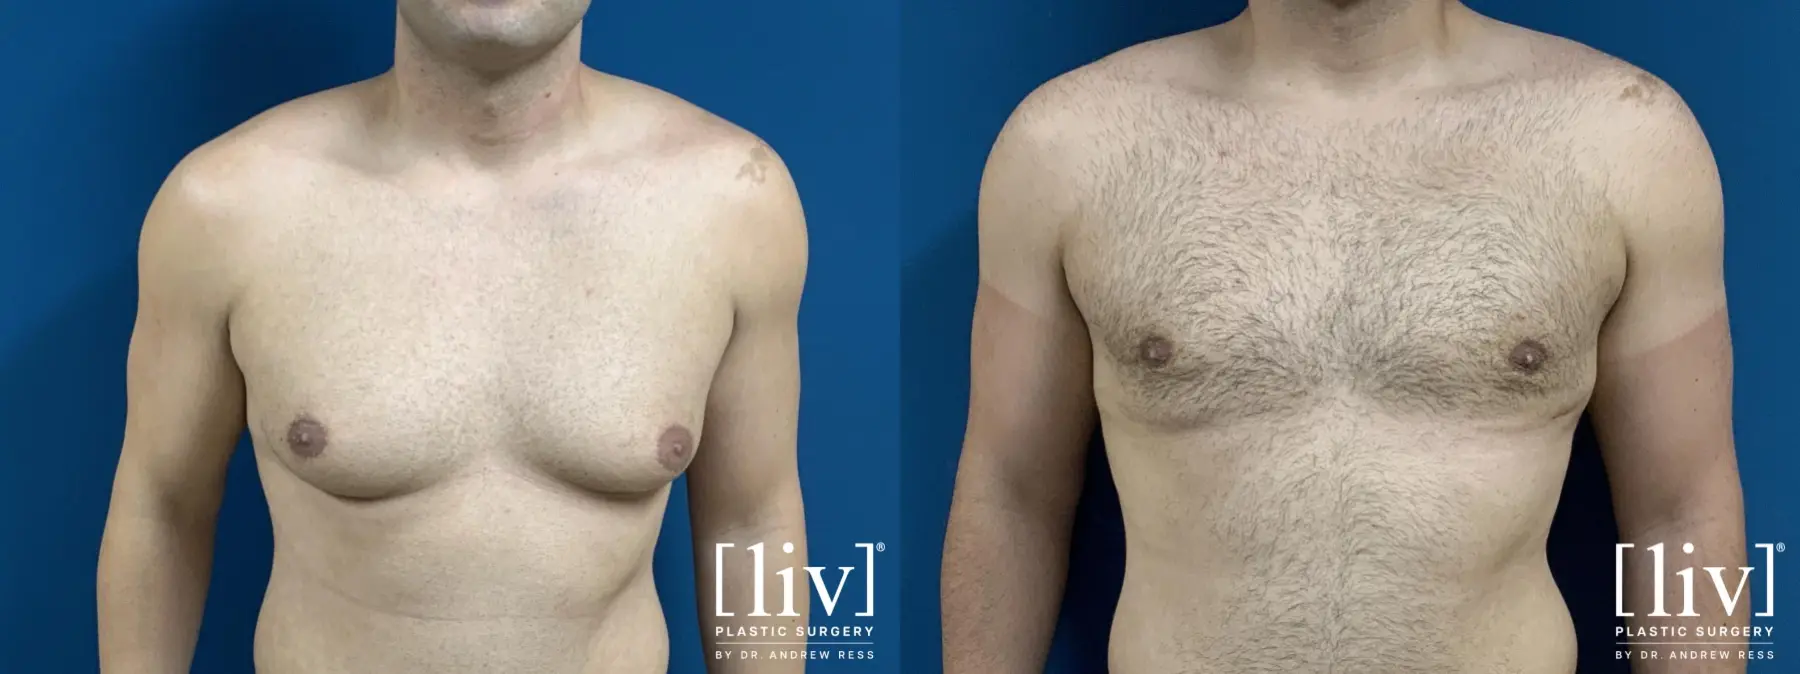 Gynecomastia: Patient 1 - Before and After 1